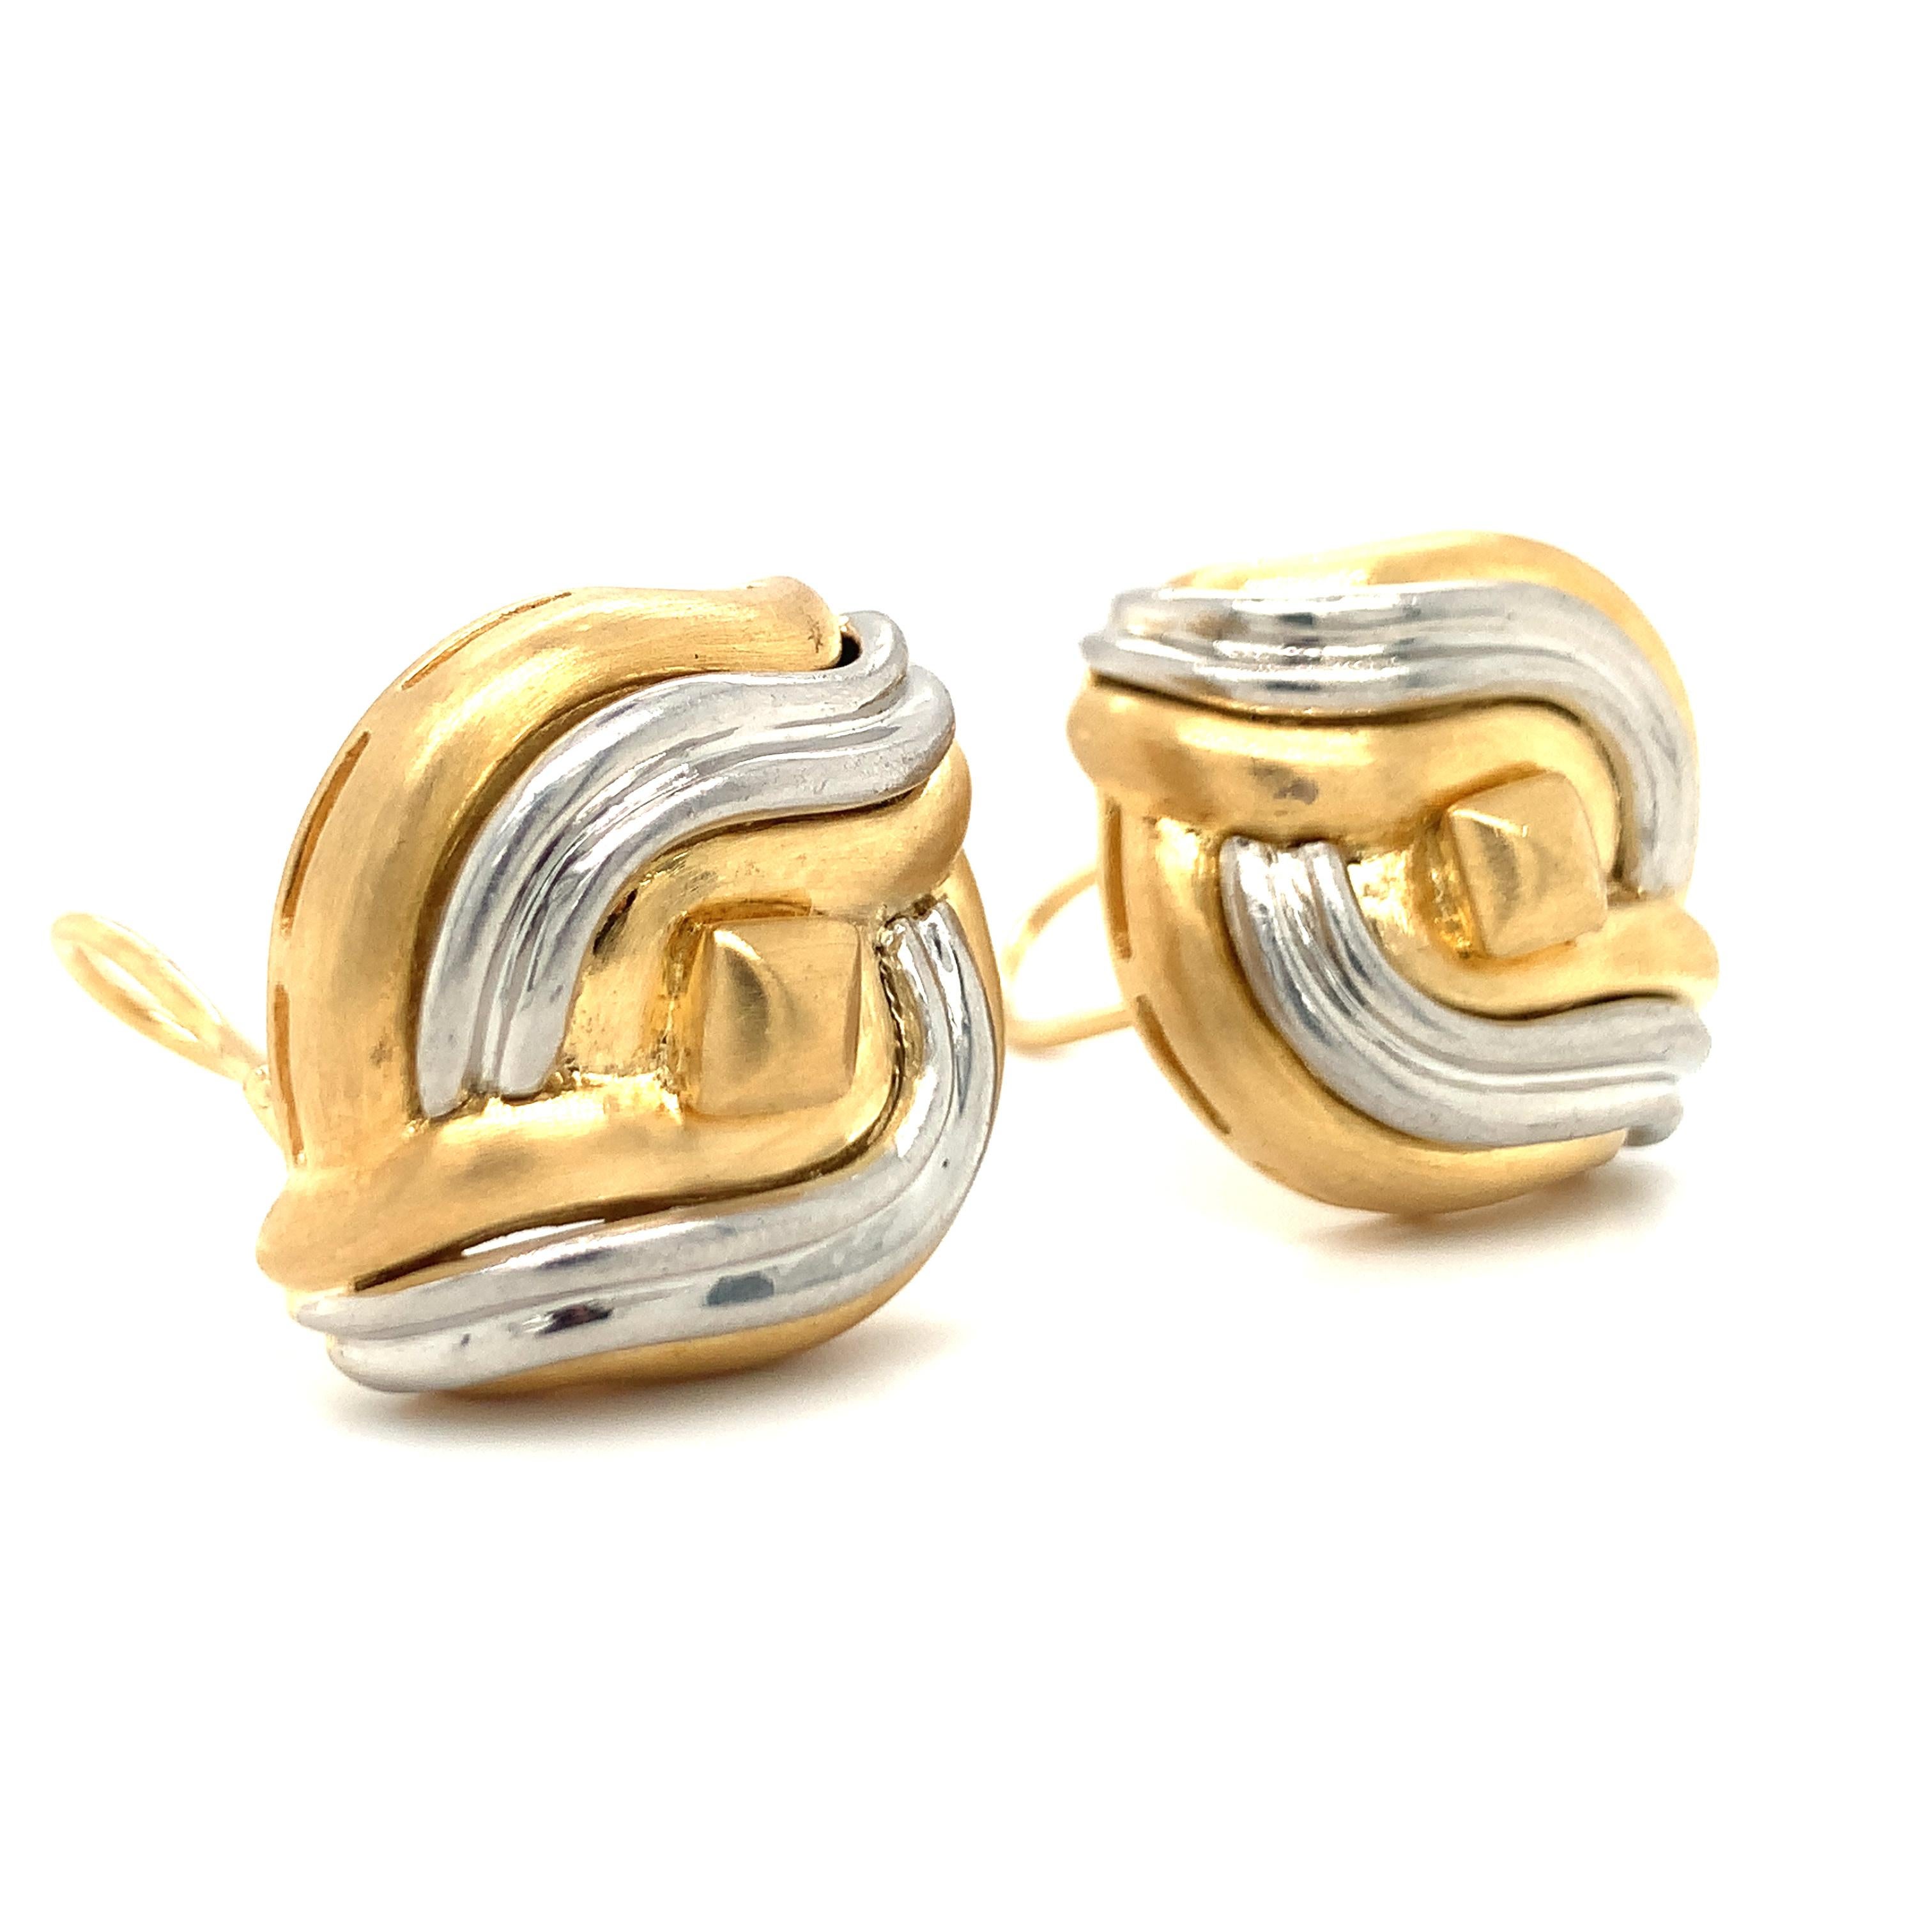 One pair of platinum and 18K yellow gold diamond-shaped, wave motif earrings with textured and high polish finish throughout measuring 28 millimeters long in size, with 18K yellow gold omega backs and posts.

Sleek, dimension, showy.

Metal: